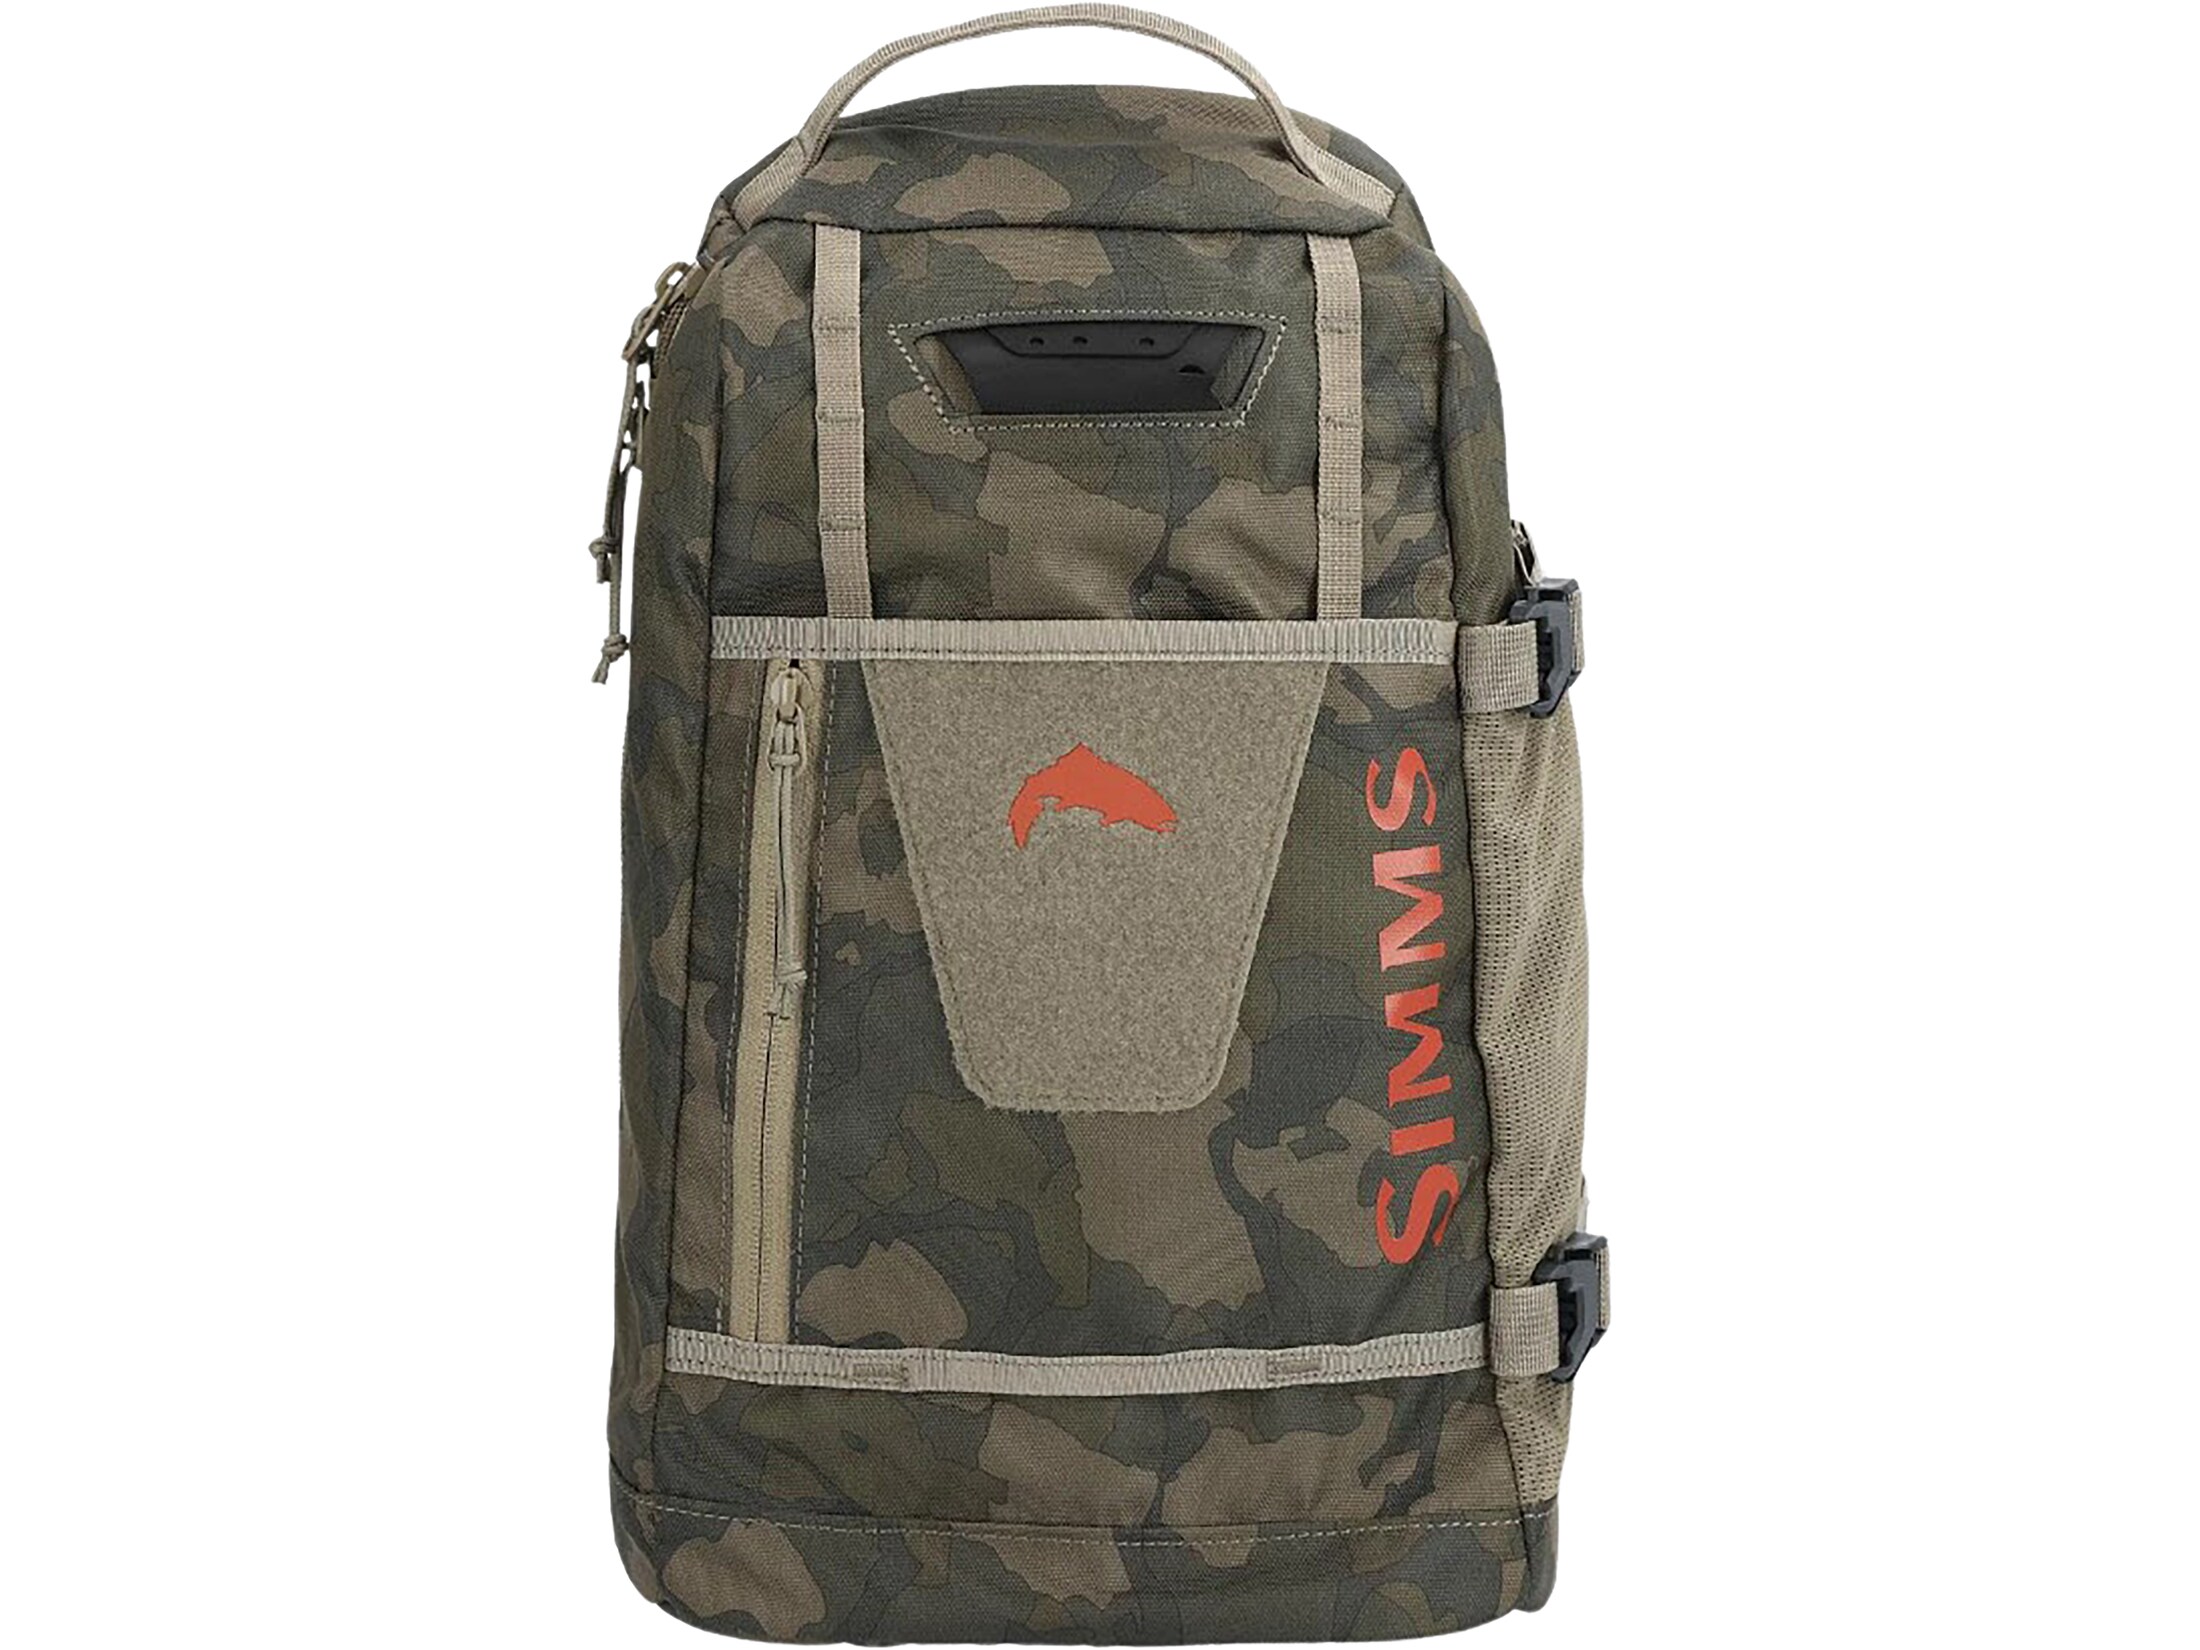 Simms Tributary Fly Fishing Sling Pack Regiment Camo Olive Drab